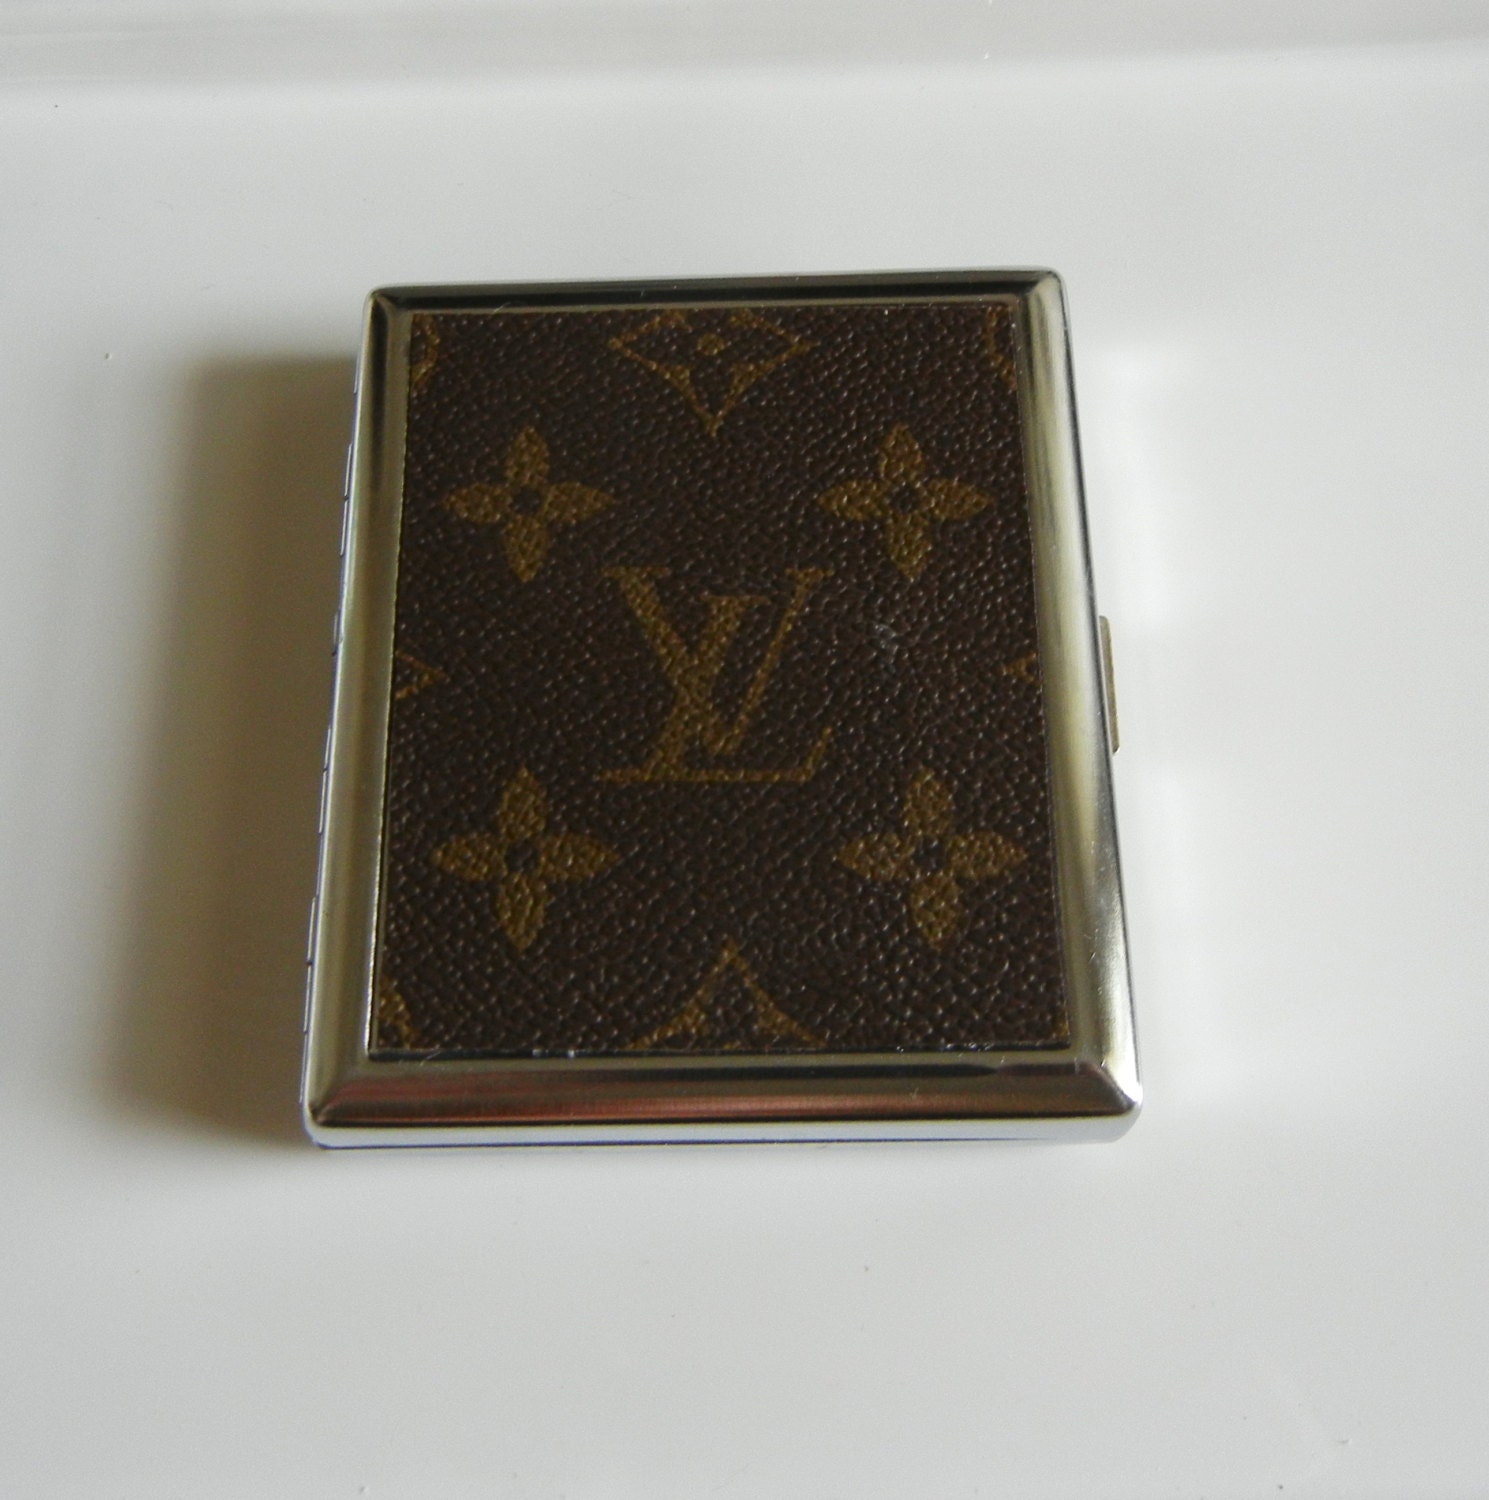 Louis Vuitton upcycled cigarette or ID case OOAK upcycled by